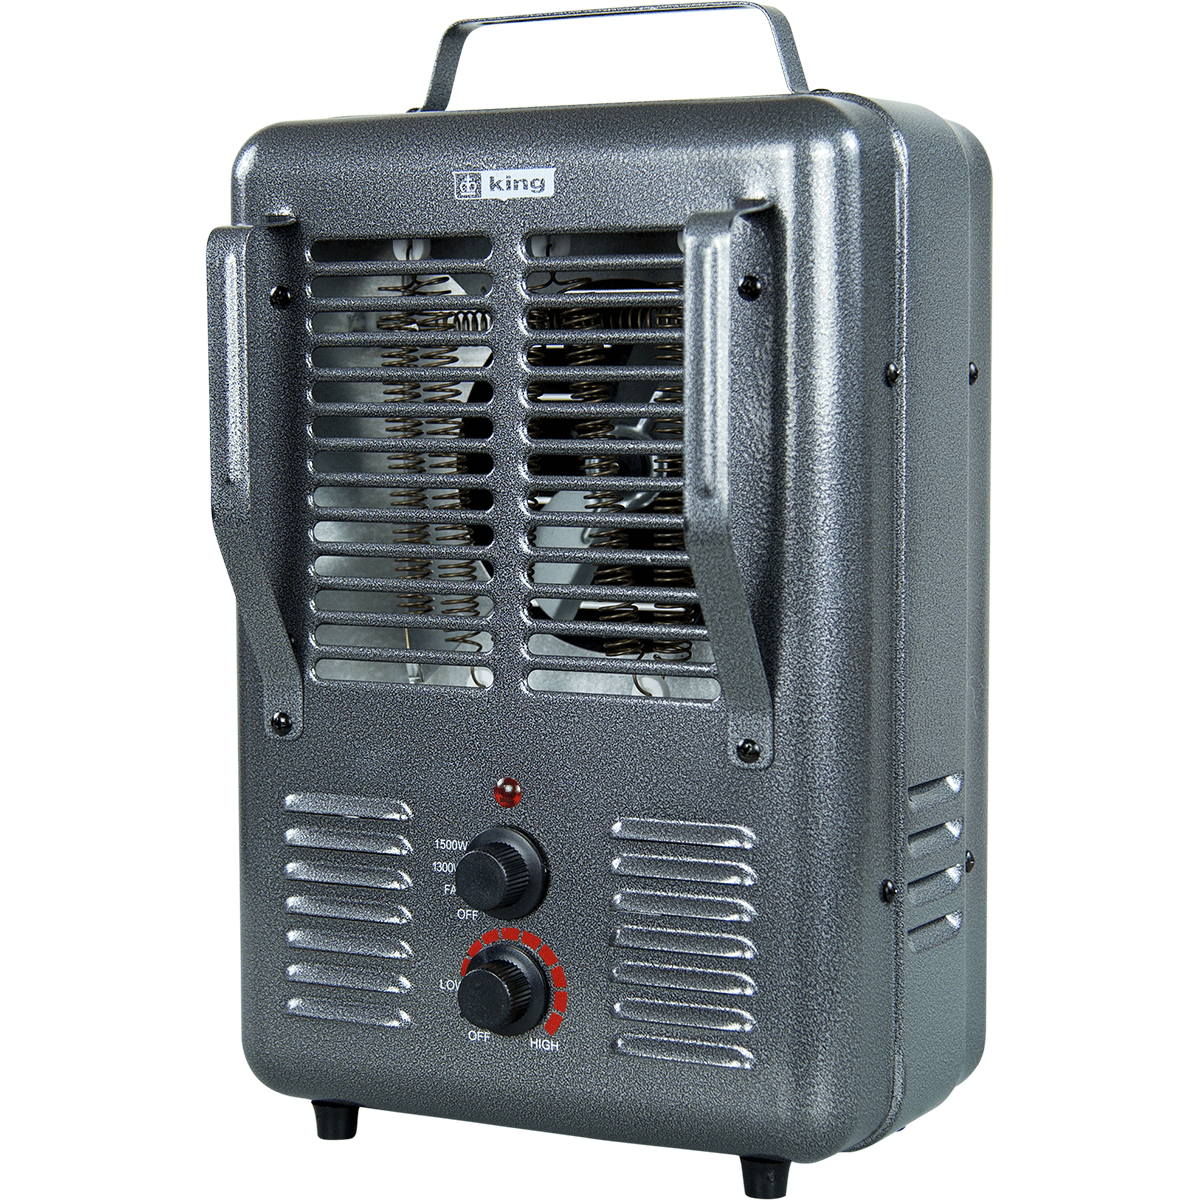 King Electric PHM 1 1500 Watt Portable Milkhouse Utility Heater at 